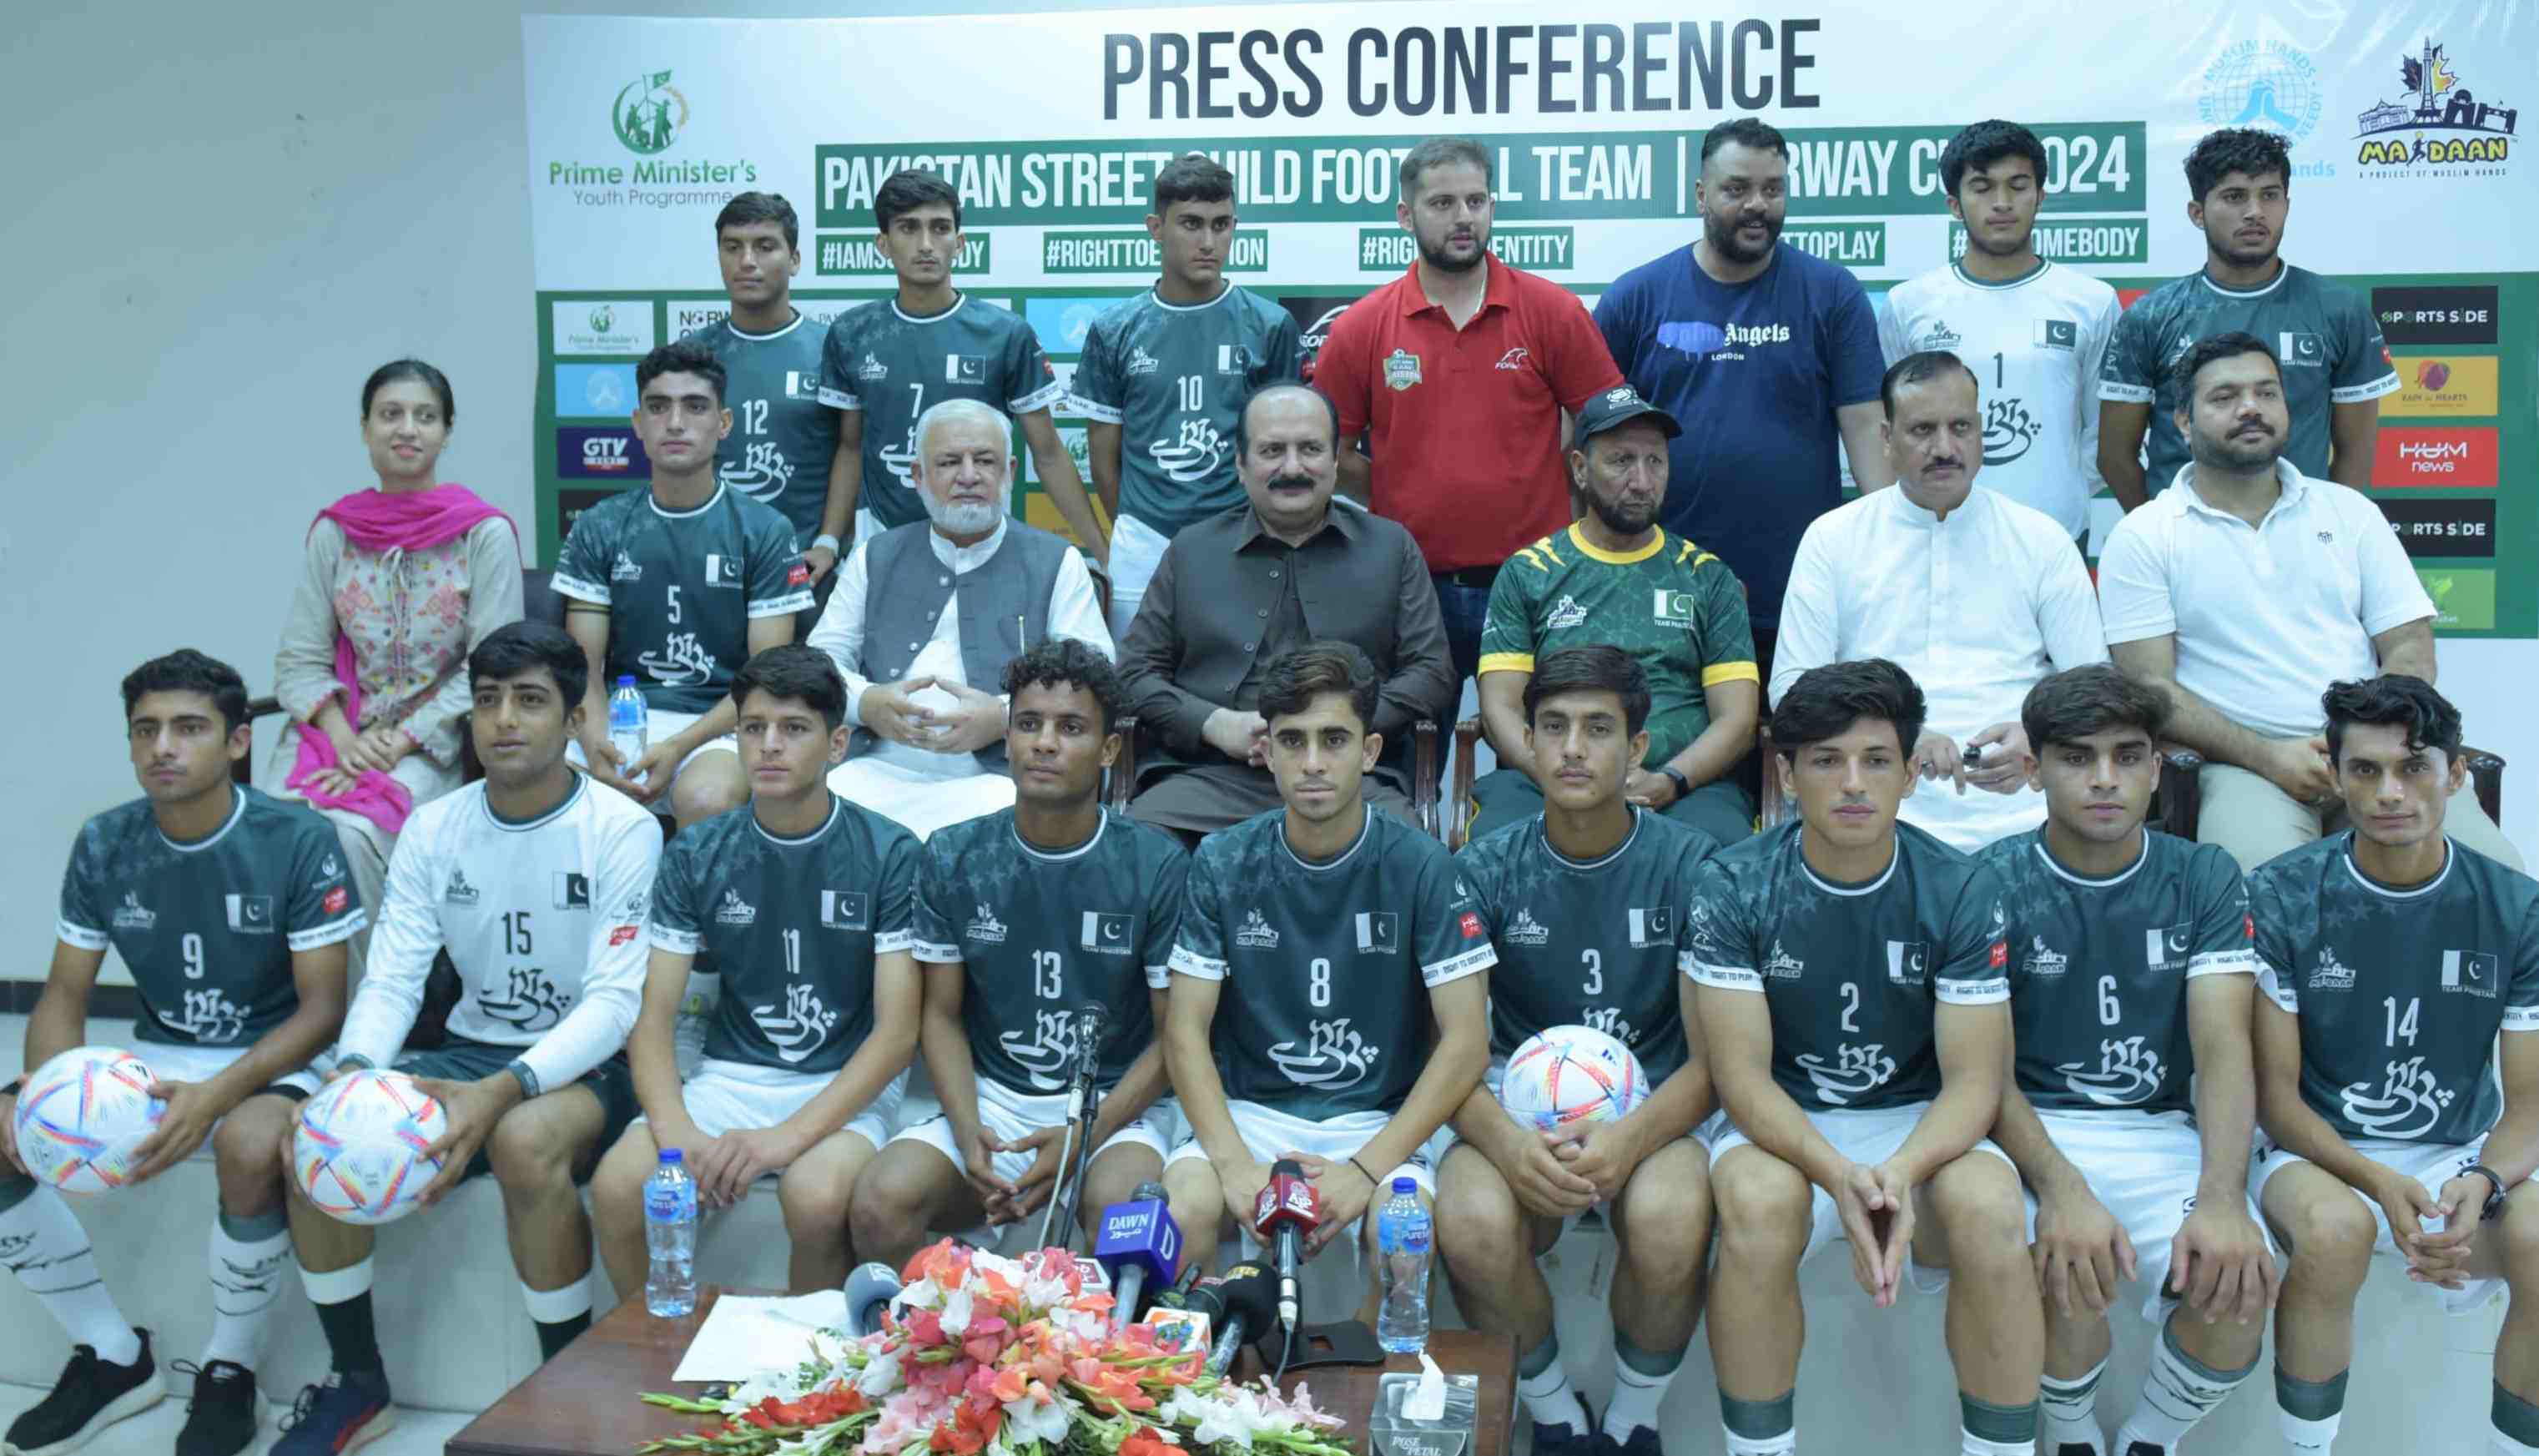 Pakistan Street Child Football Team announced for Norway Cup 2024